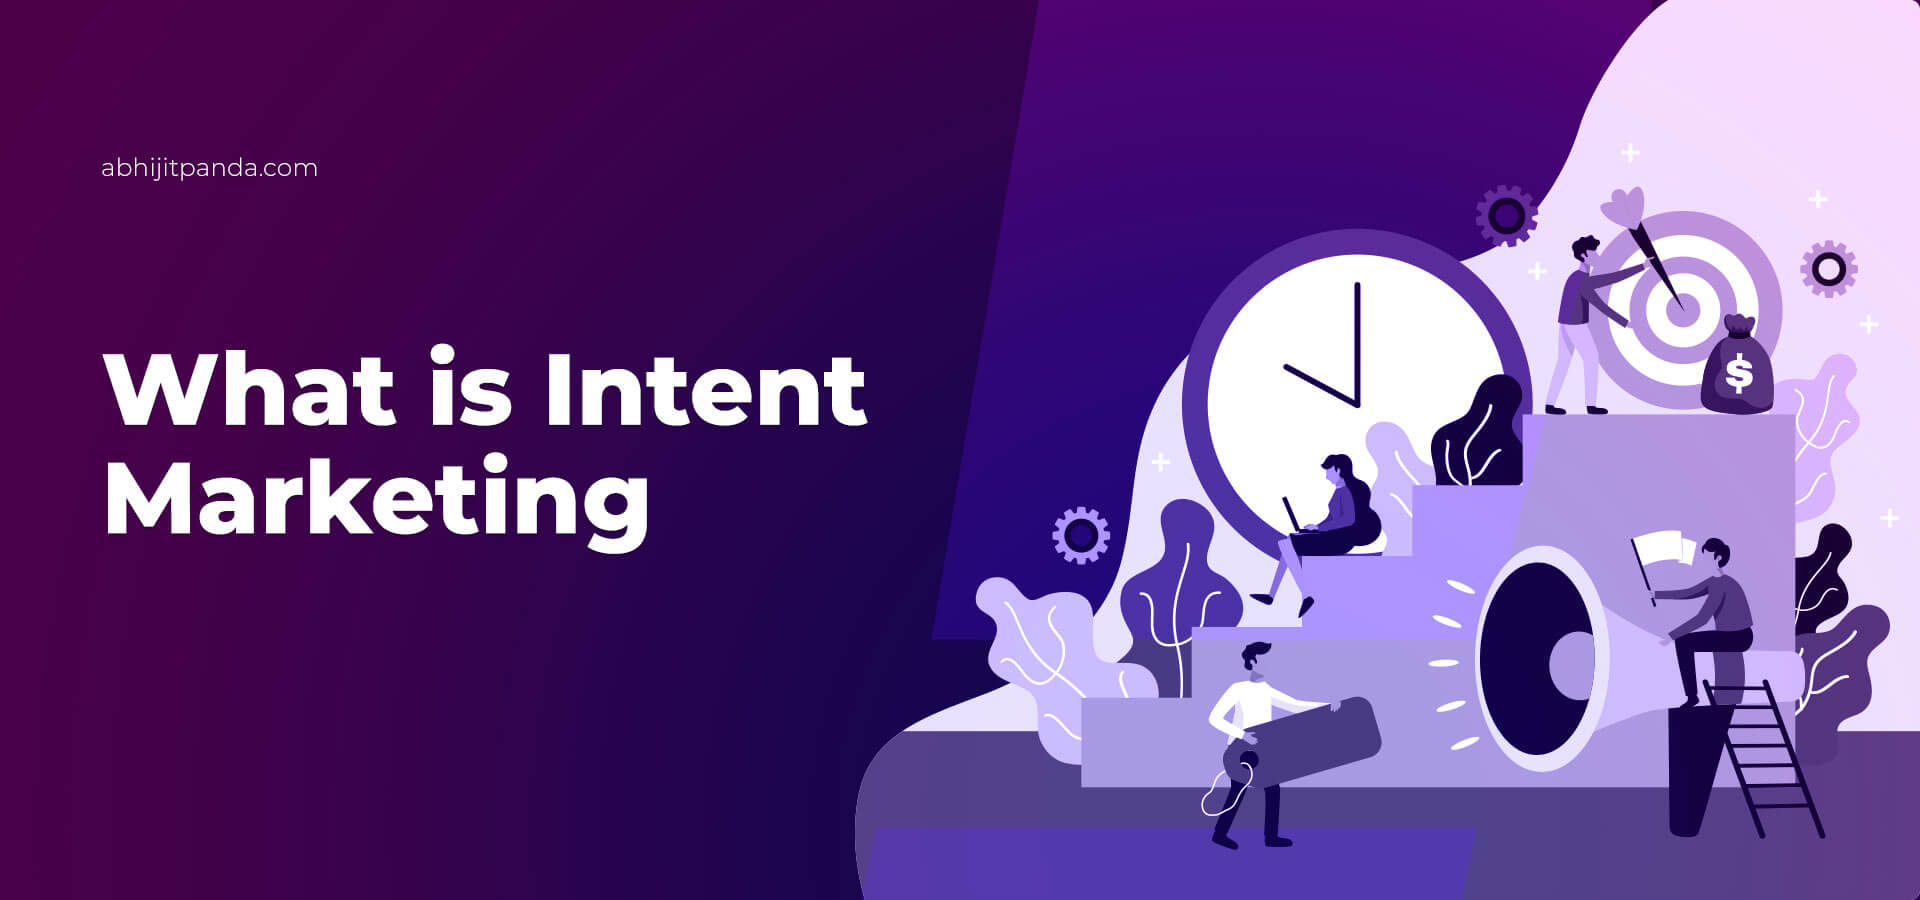 What is Intent Marketing